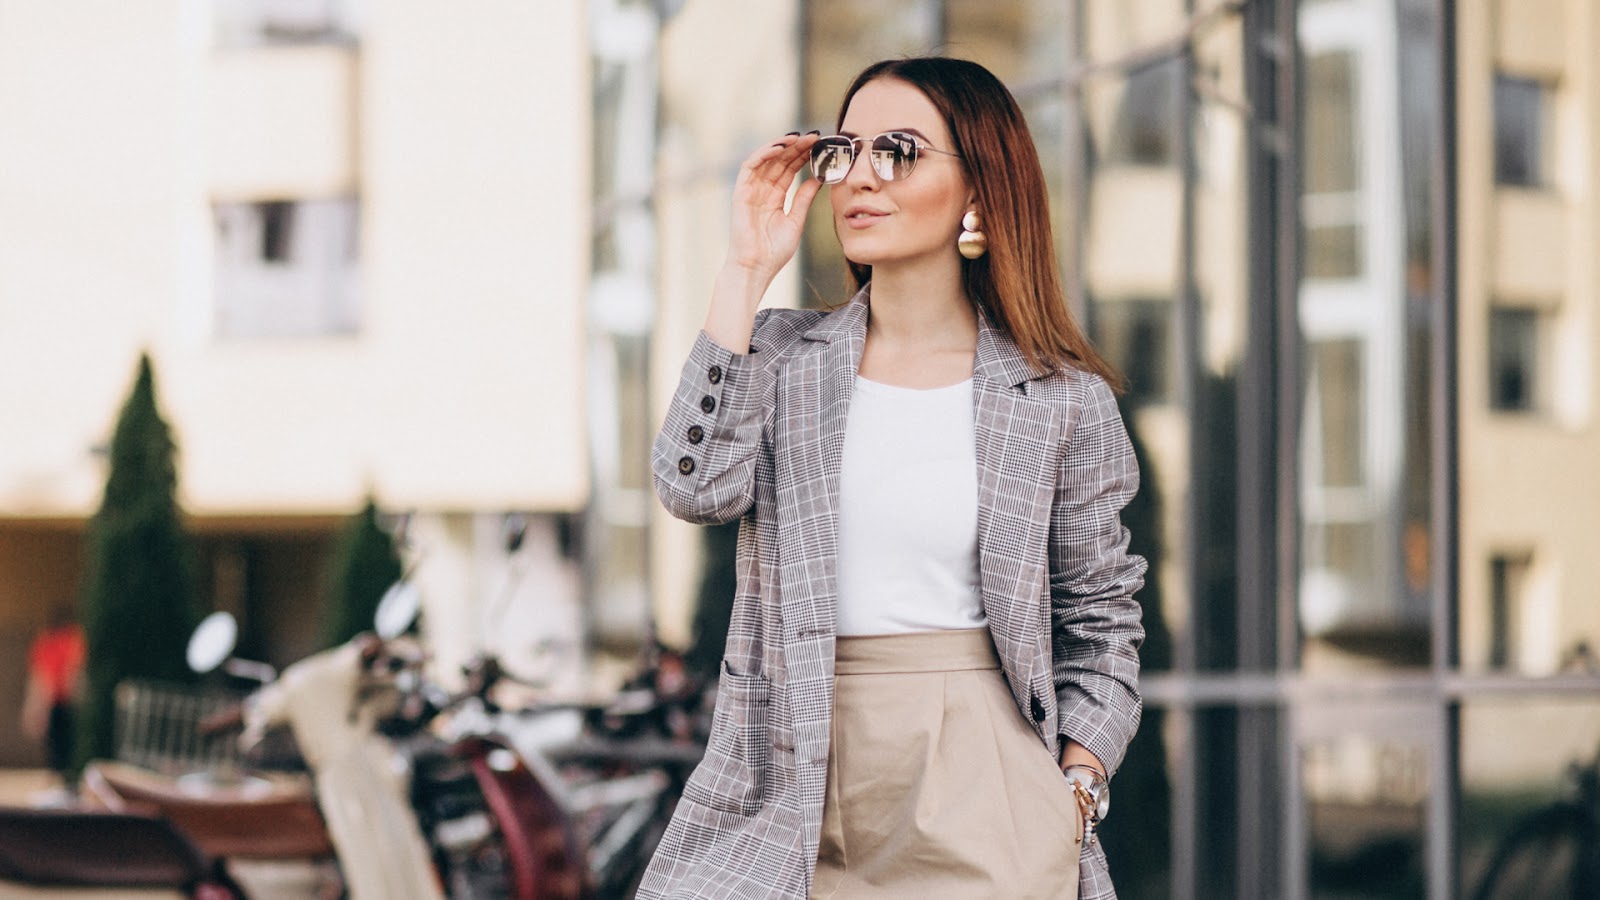 Styling tips for the workplace: Dressing professionally and stylishly